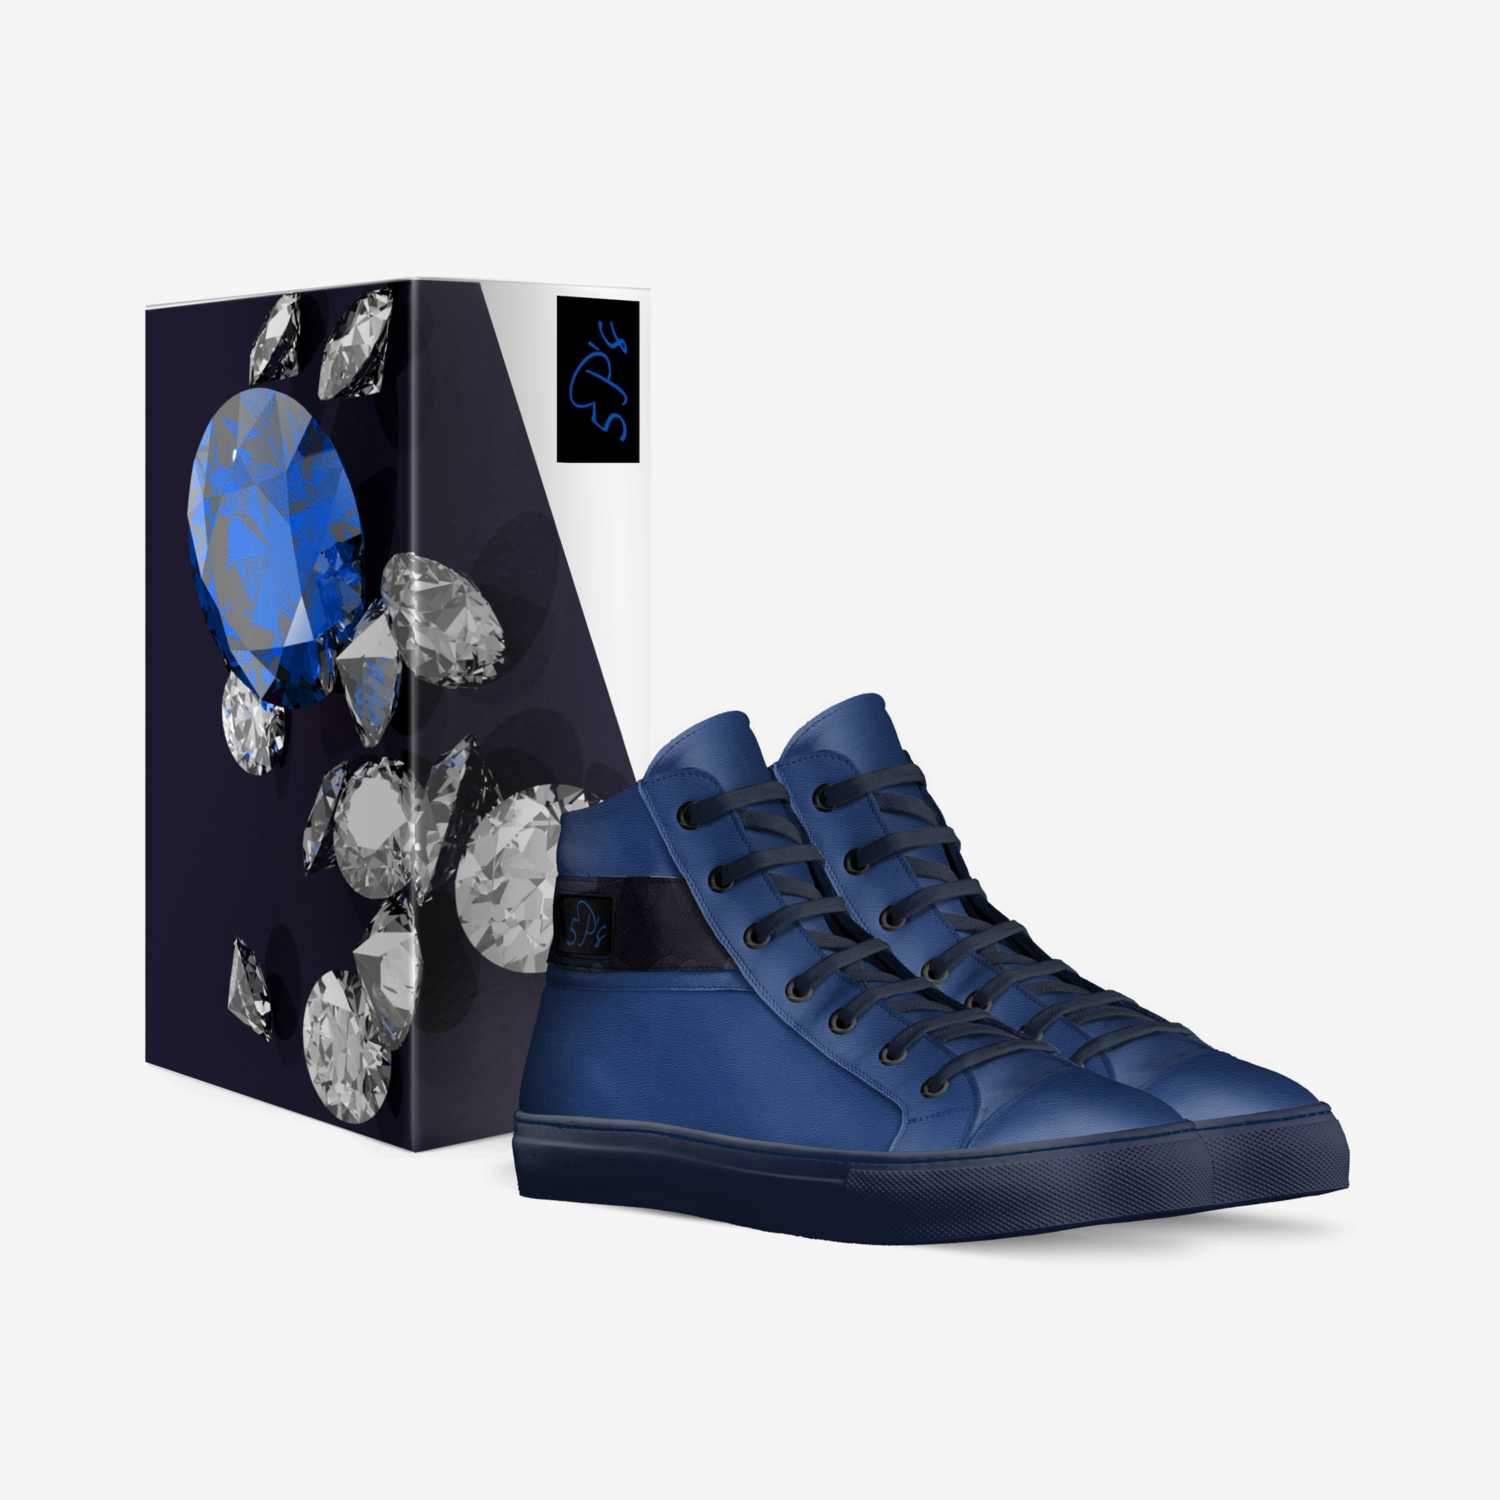 5Ps Sapphire Blue custom made in Italy shoes by Jordon Mcclain | Box view